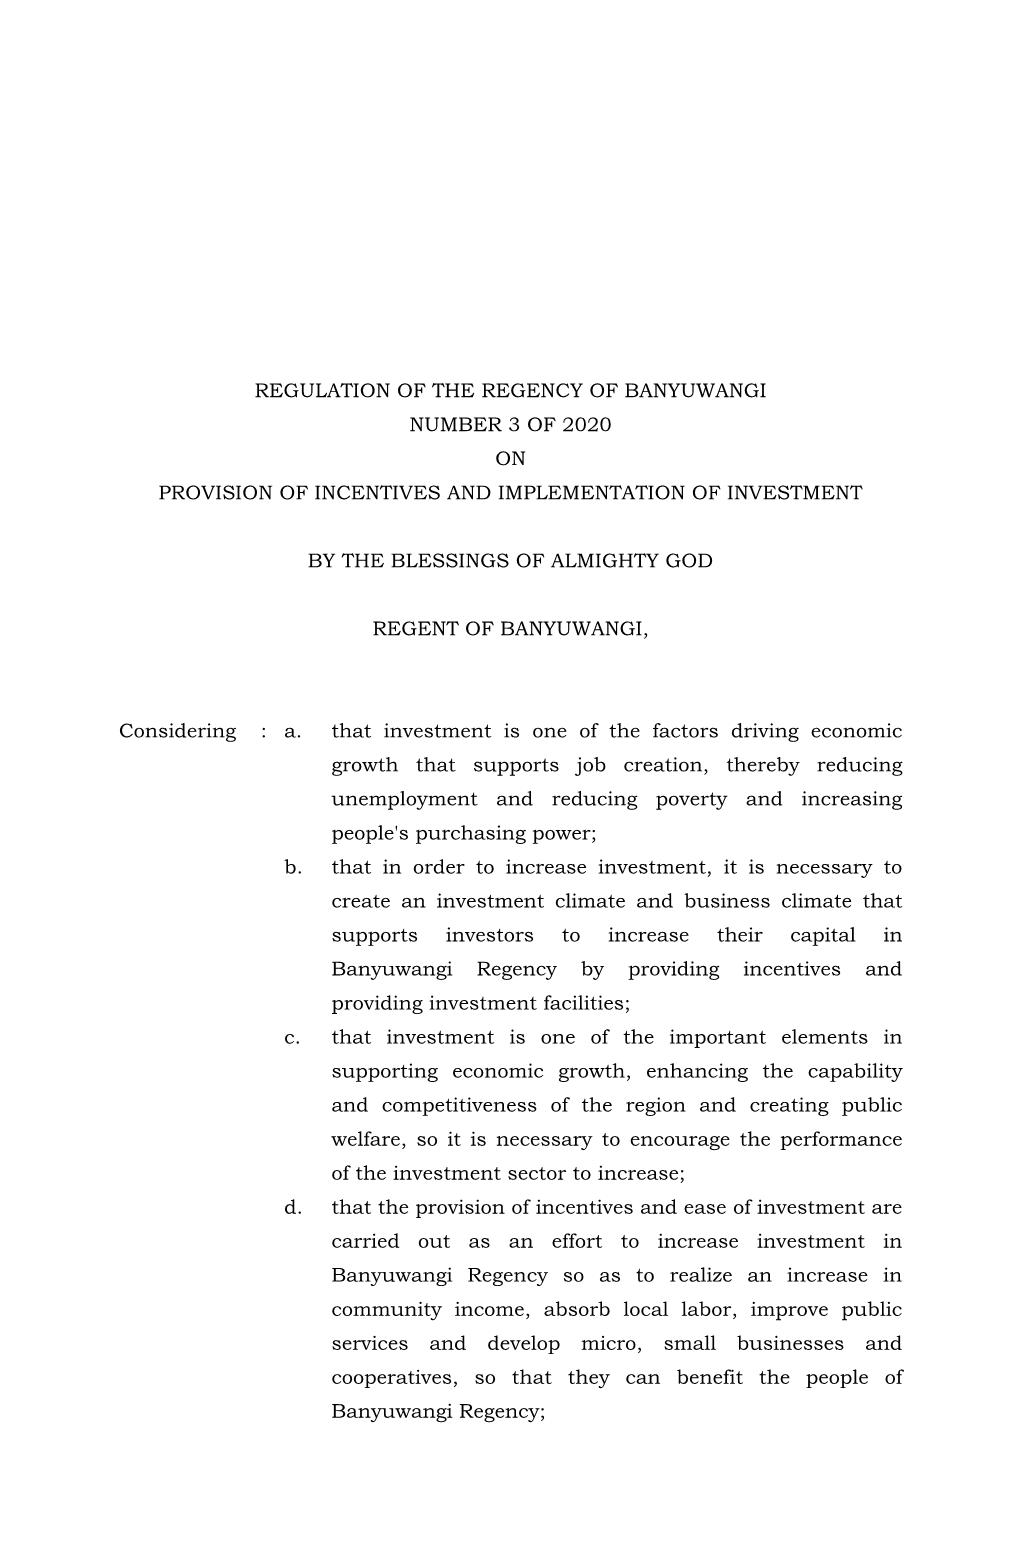 Regulation of the Regency of Banyuwangi Number 3 of 2020 on Provision of Incentives and Implementation of Investment